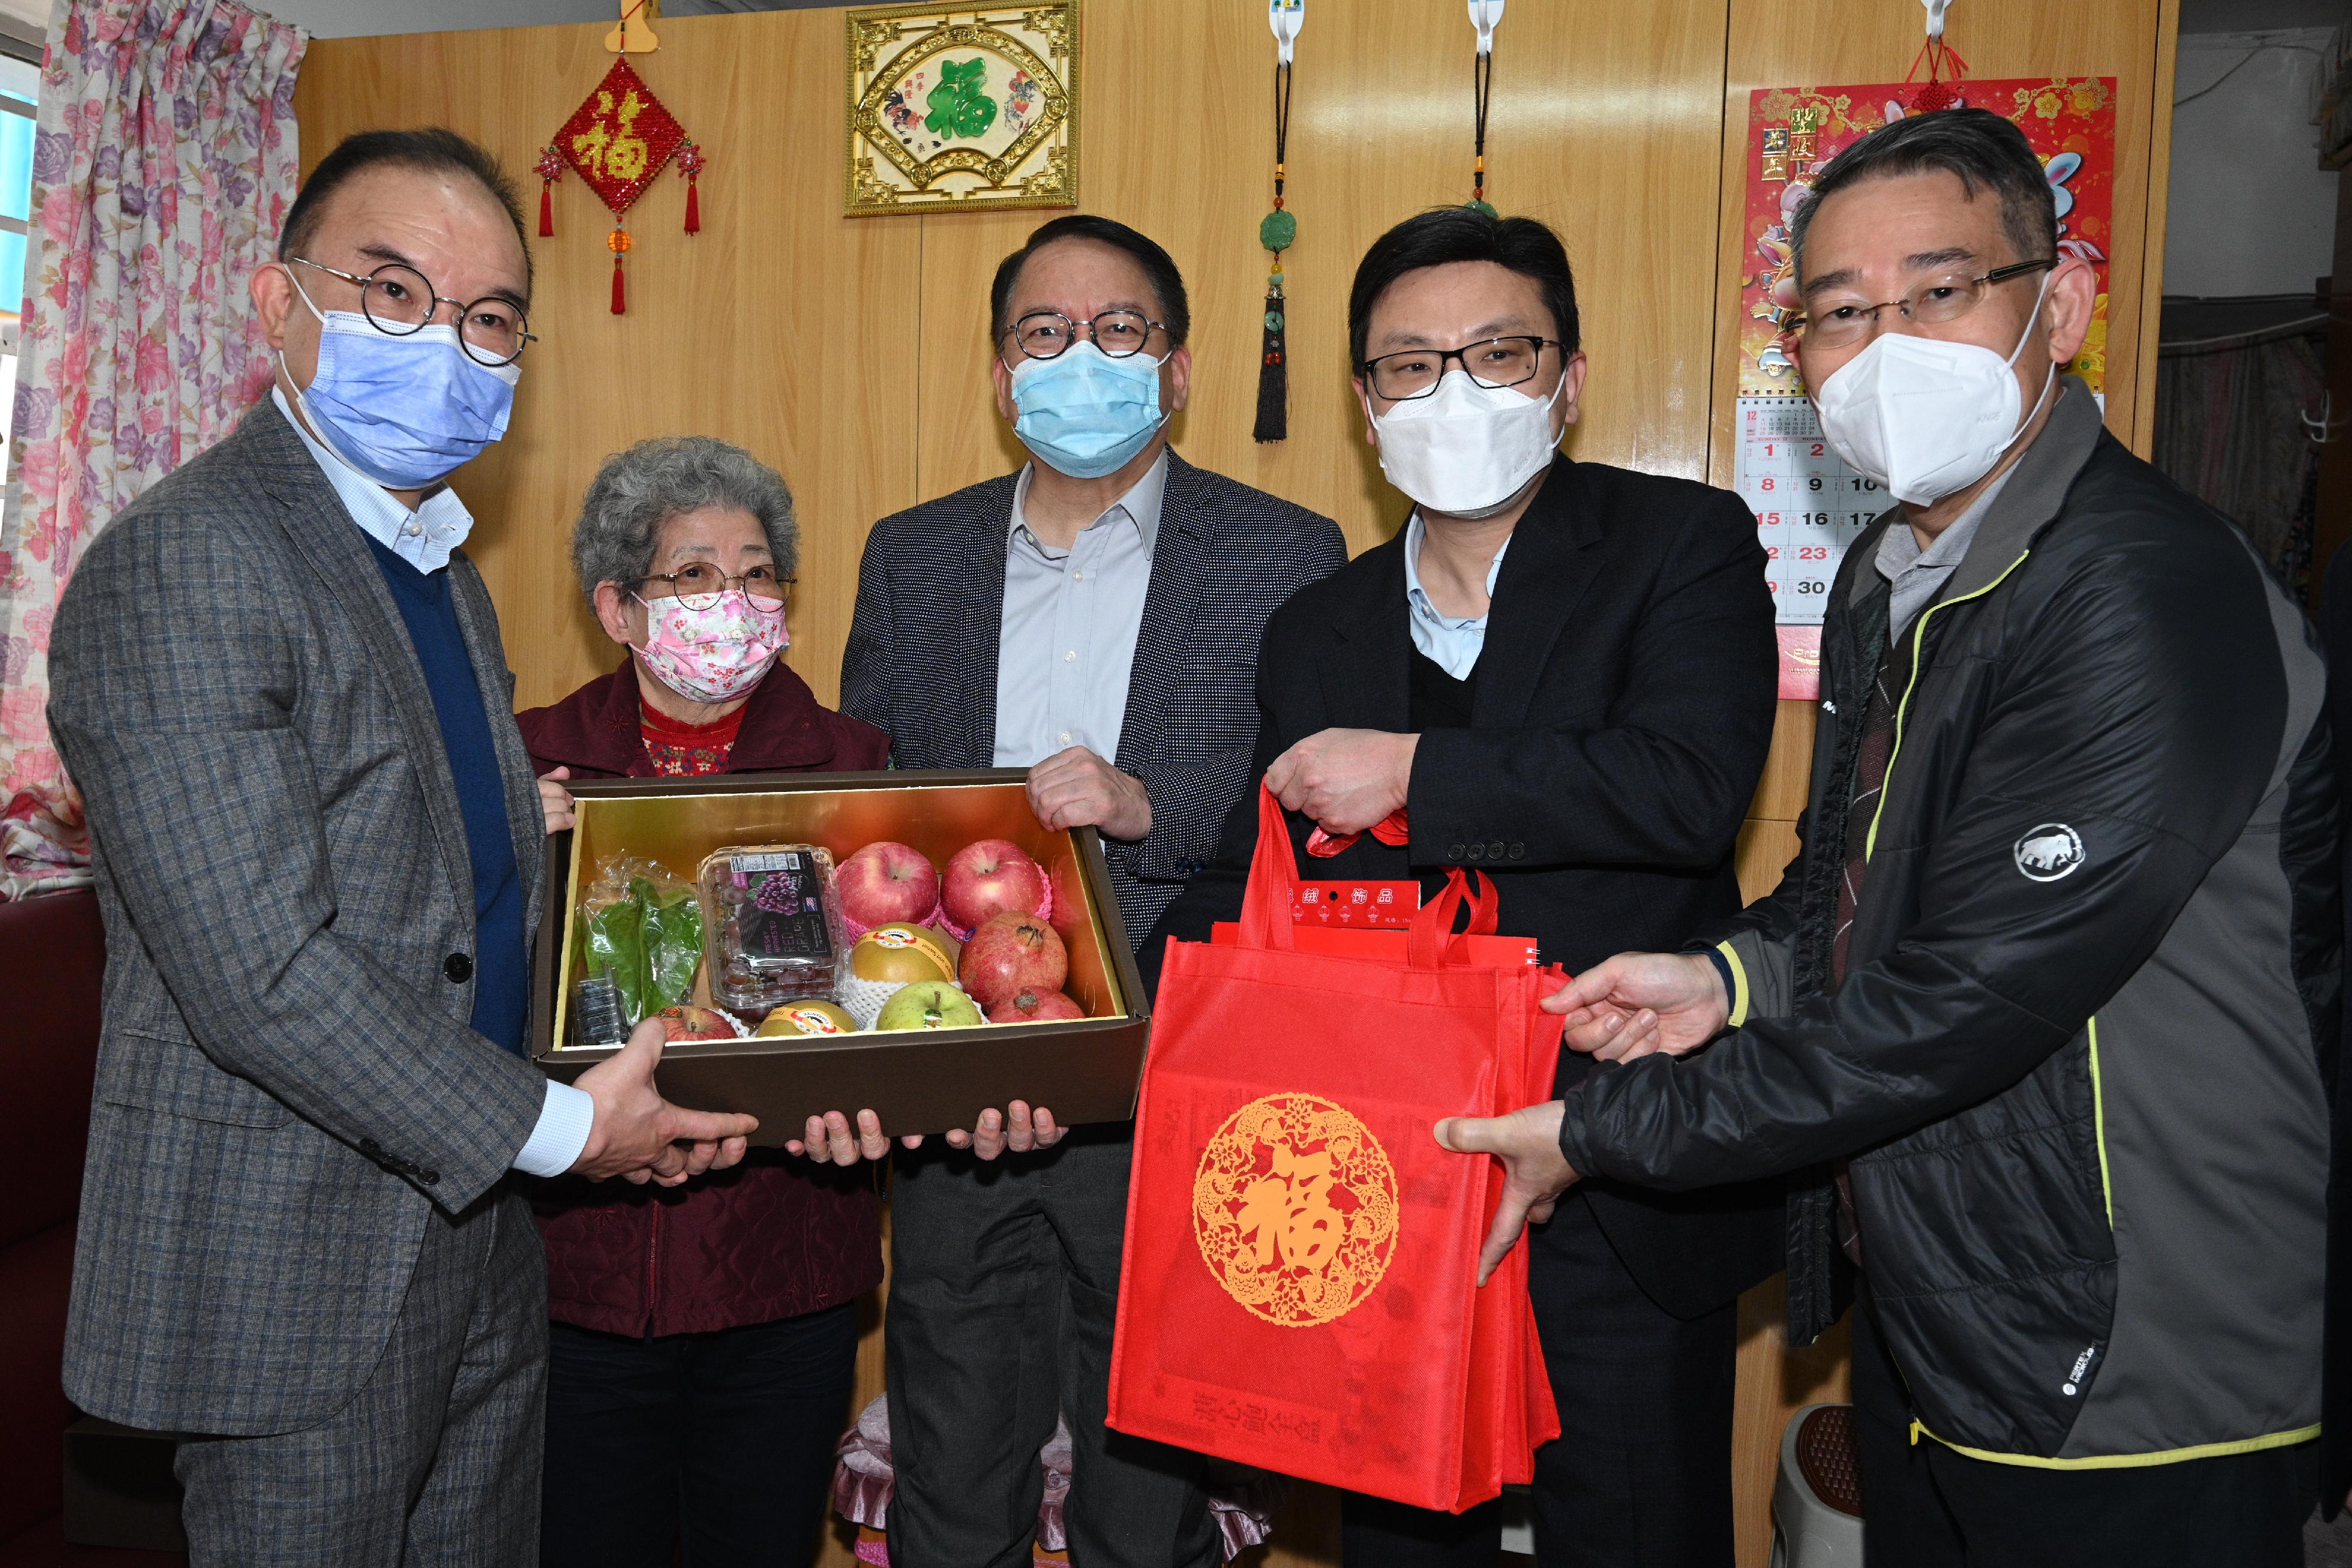 The Chief Secretary for Administration, Mr Chan Kwok-ki, and the Deputy Chief Secretary for Administration, Mr Cheuk Wing-hing, together with a number of Principal Officials, visited grass-roots families in the Eastern District to distribute Chinese New Year blessing bags and celebrate Chinese New Year with them today (January 21). Photo shows Mr Chan (centre); the Secretary for Constitutional and Mainland Affairs, Mr Erick Tsang Kwok-wai (first left); the Secretary for Labour and Welfare, Mr Chris Sun (second right); and the District Officer (Eastern), Mr Simon Chan (first right), presenting a blessing bag to an elderly singleton.